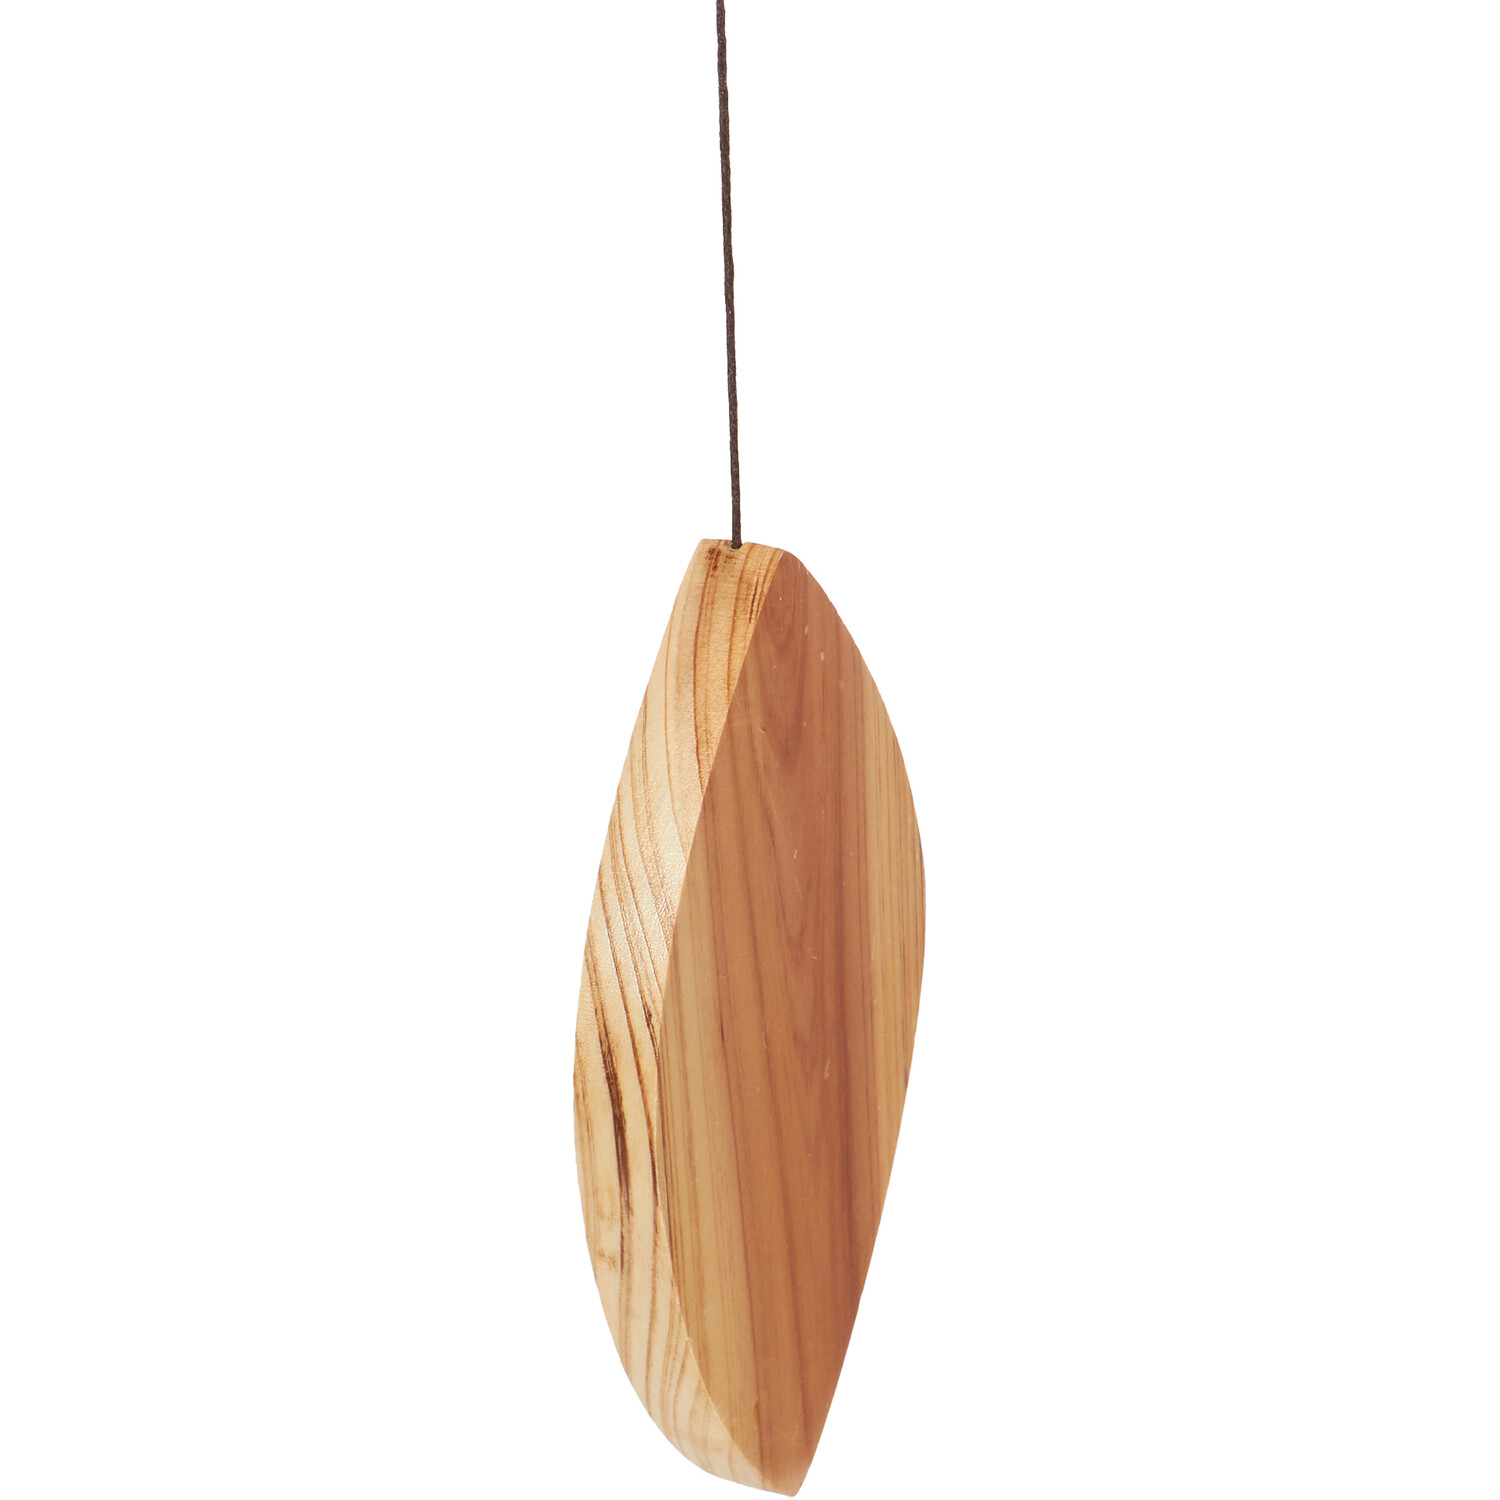 Wooden Windchime - Brown Image 4